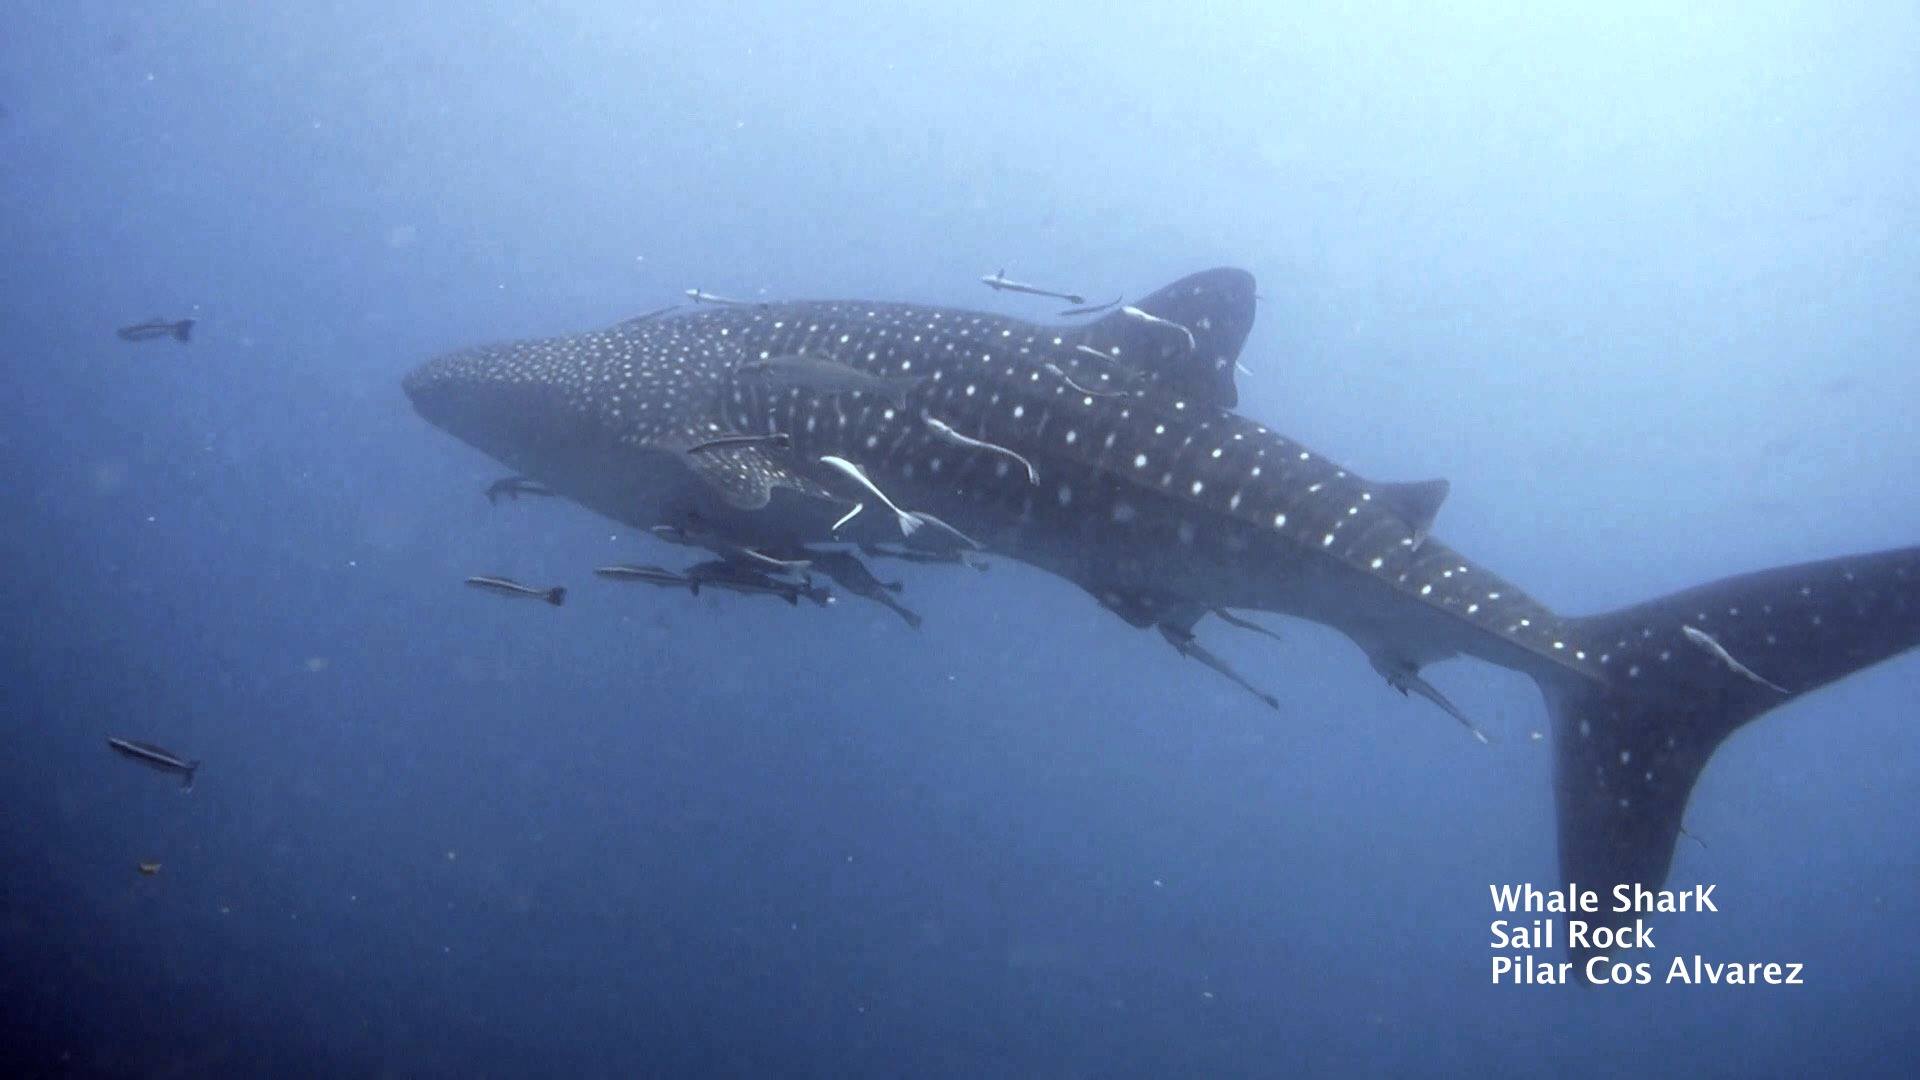 And photo of a whale shark swimming with some fish on its sides in sail rock Thailand.